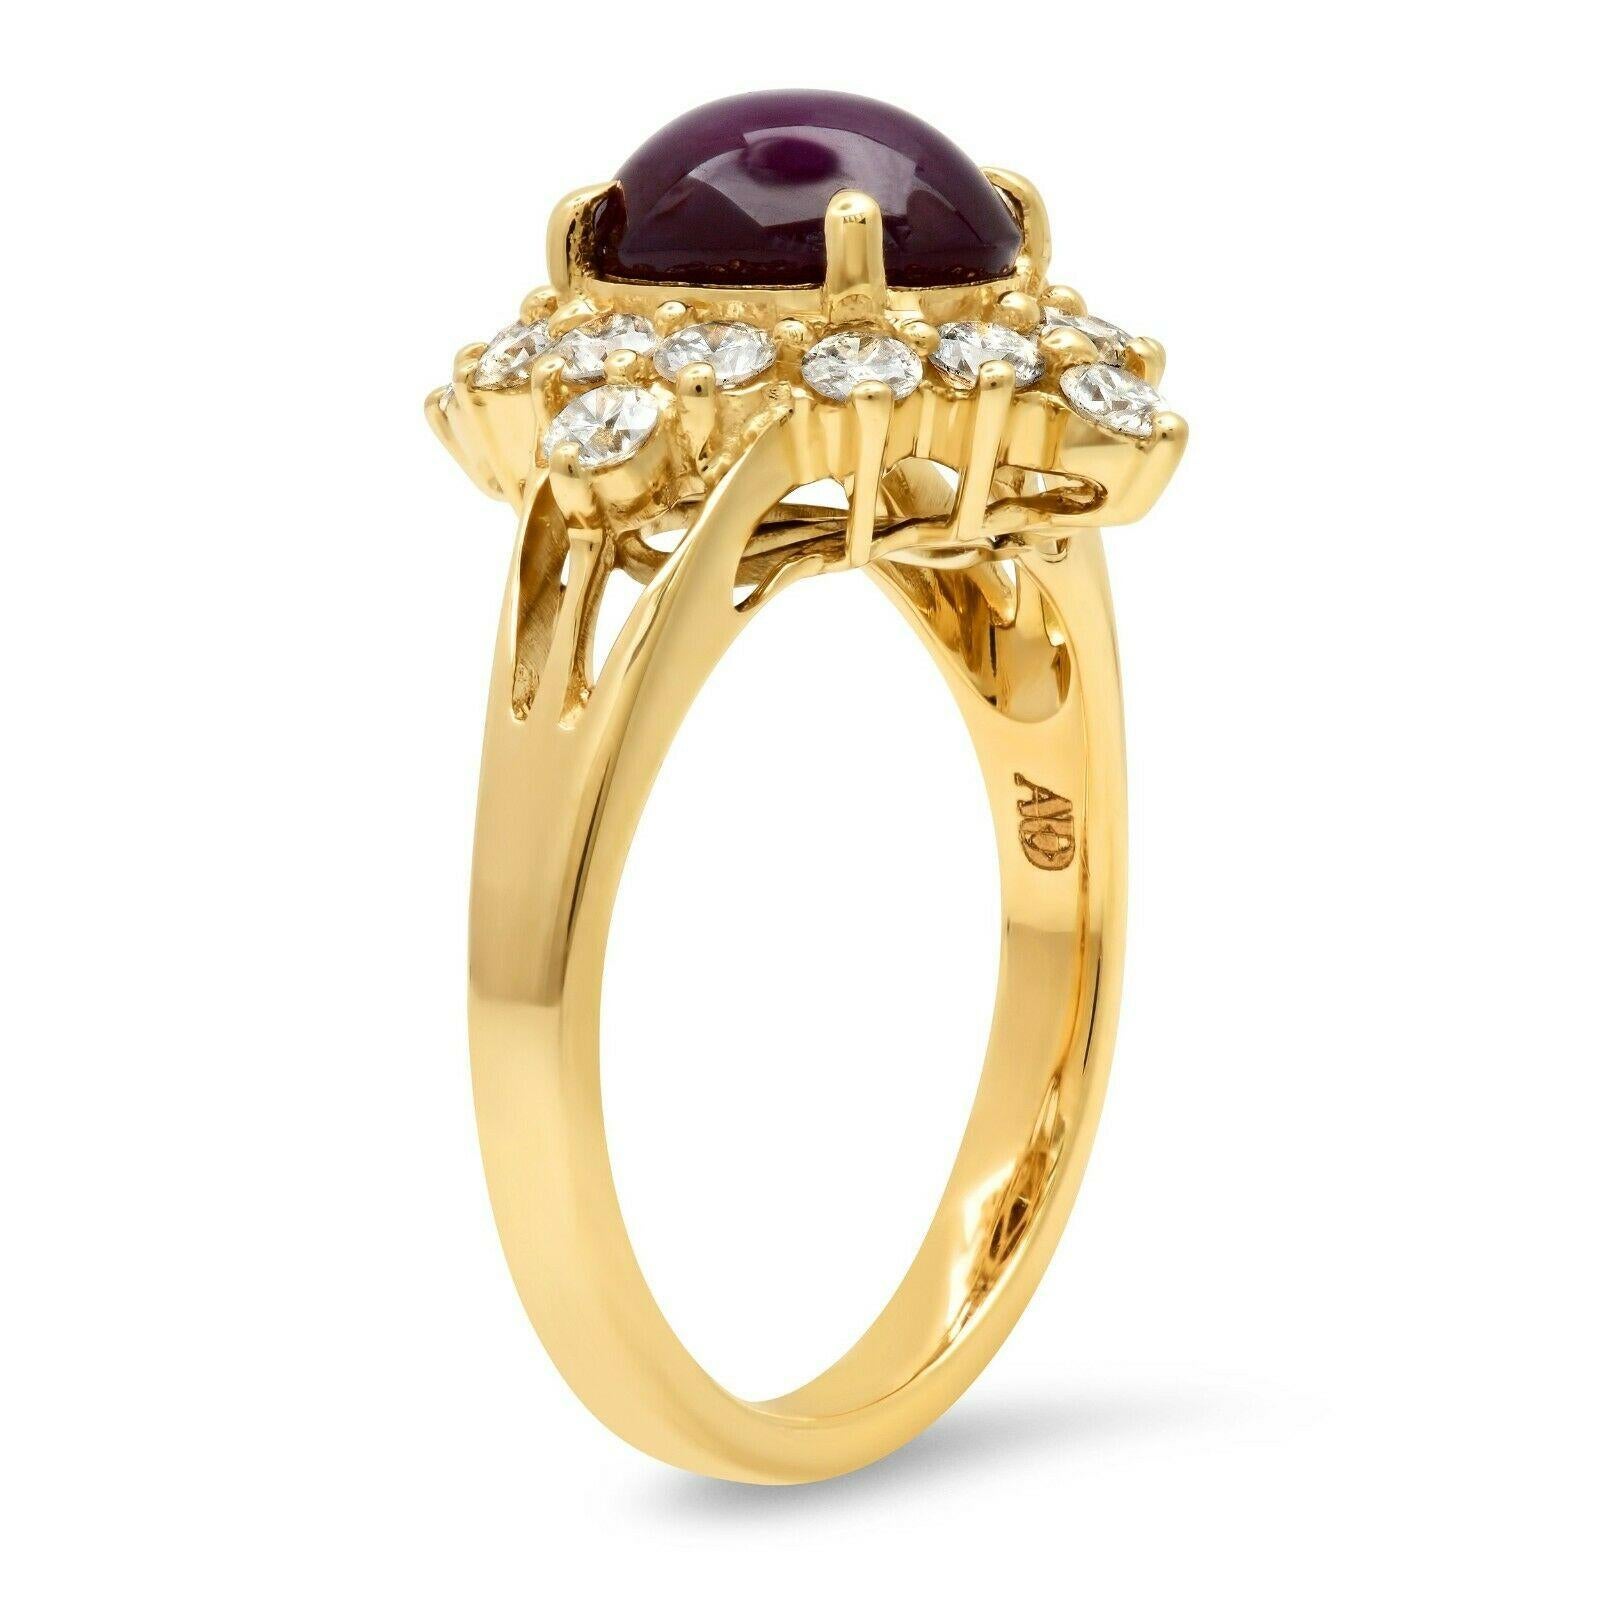 Star Ruby (2.53 carat center) and diamond (0.8 total carat weight) antique inspired cocktail ring in 14k yellow gold. The ring is designed and handmade locally in Los Angeles by Sage Designs L.A. using earth-mined and conflict free diamonds and